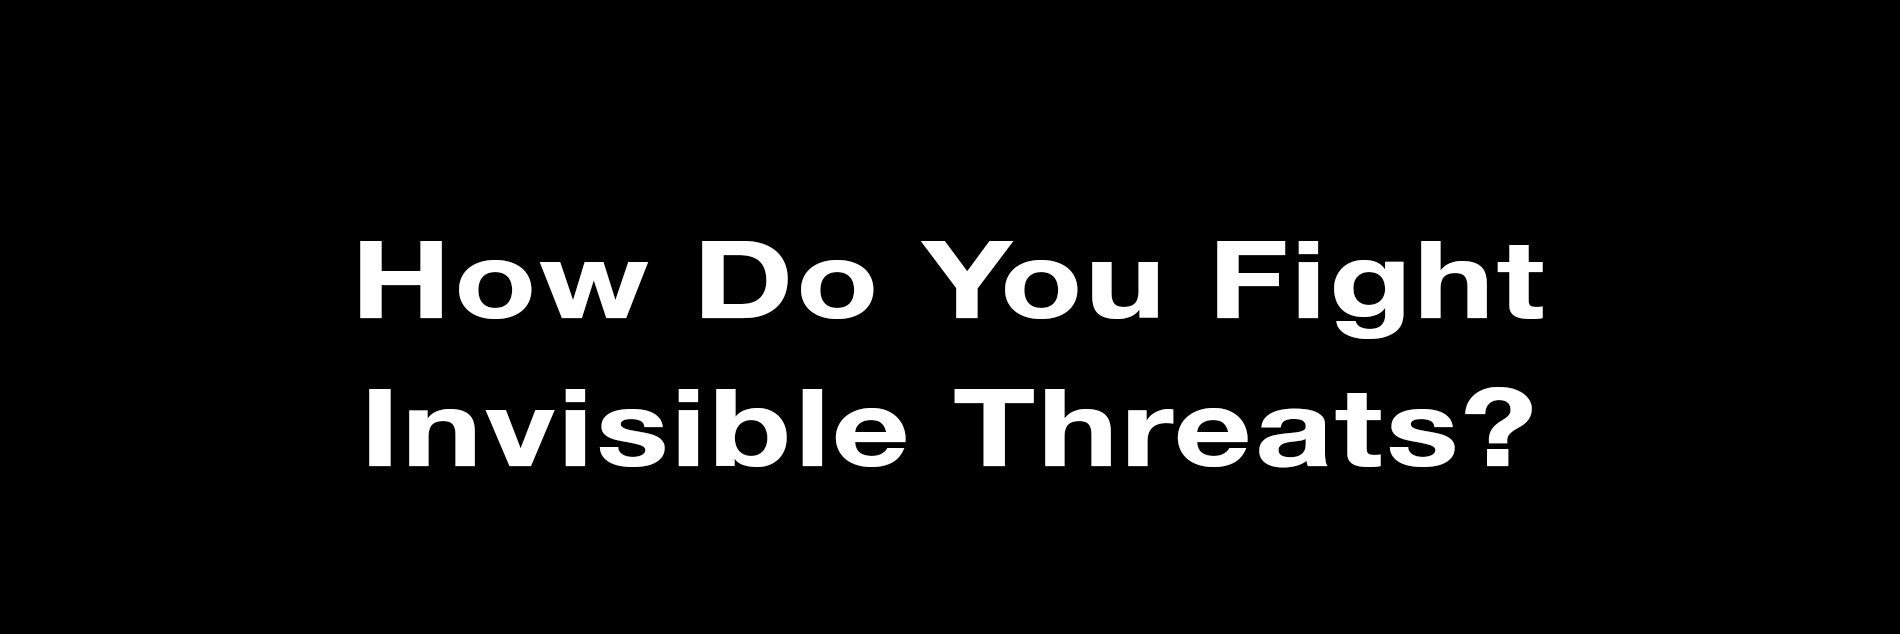 How Do You Fight Invisible Threats?